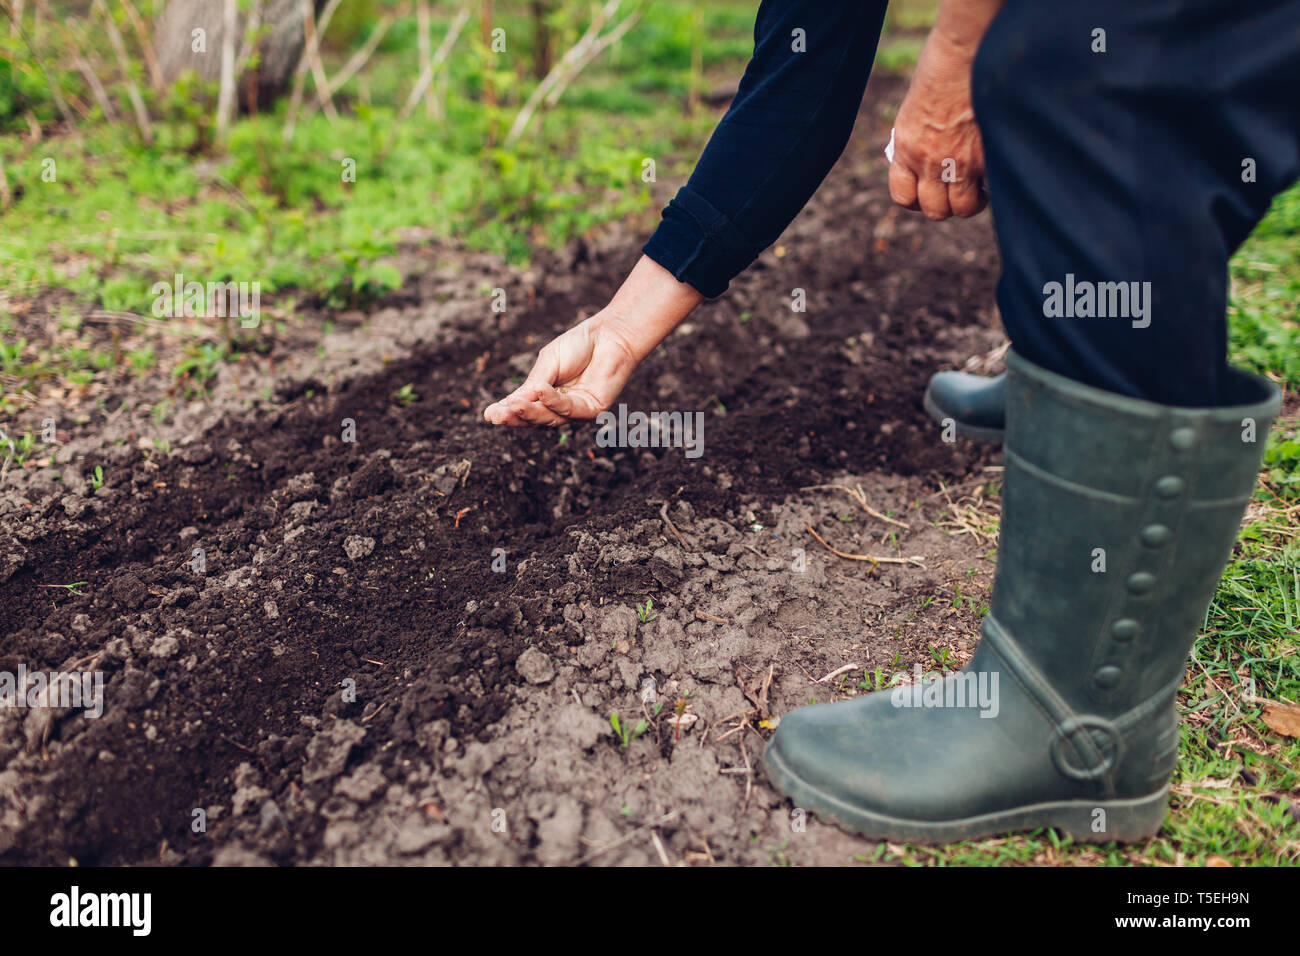 Farmer's hand planting a seed in soil. Senior woman sowing parsley in spring garden. Agriculture concept Stock Photo